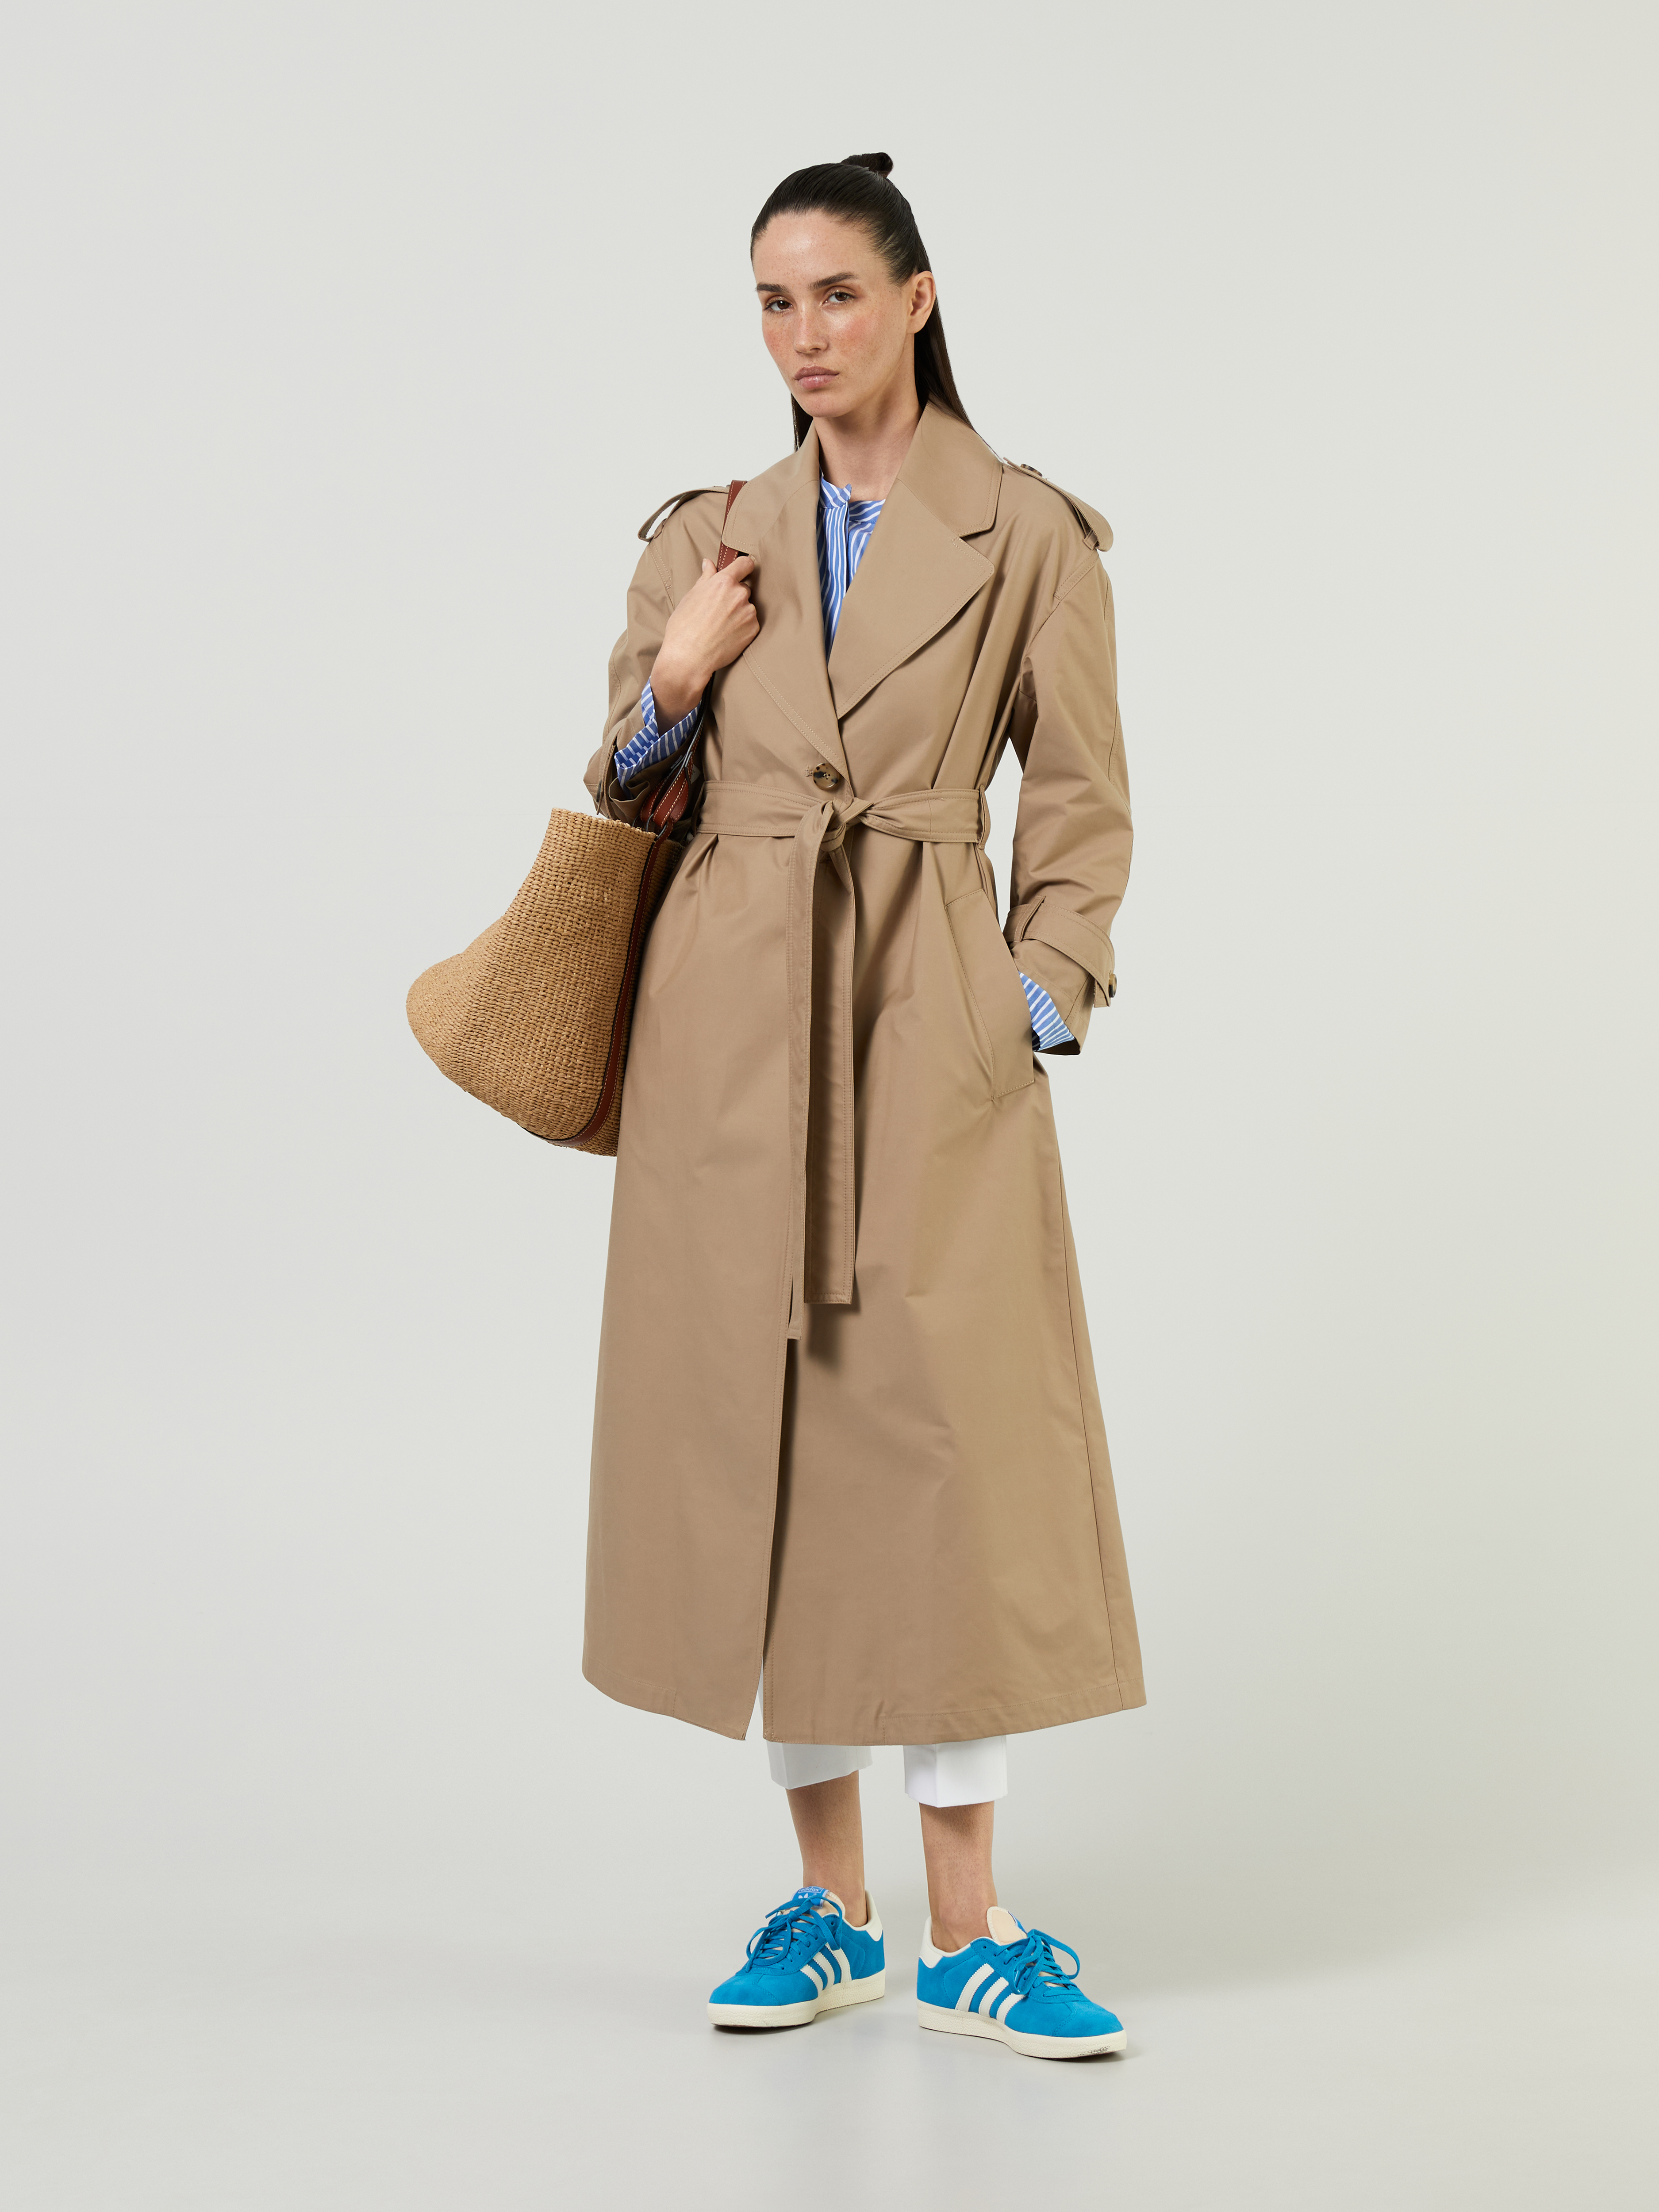 S Max Mara Trenchcoat 'Qtrench' Beige | Trench Coats